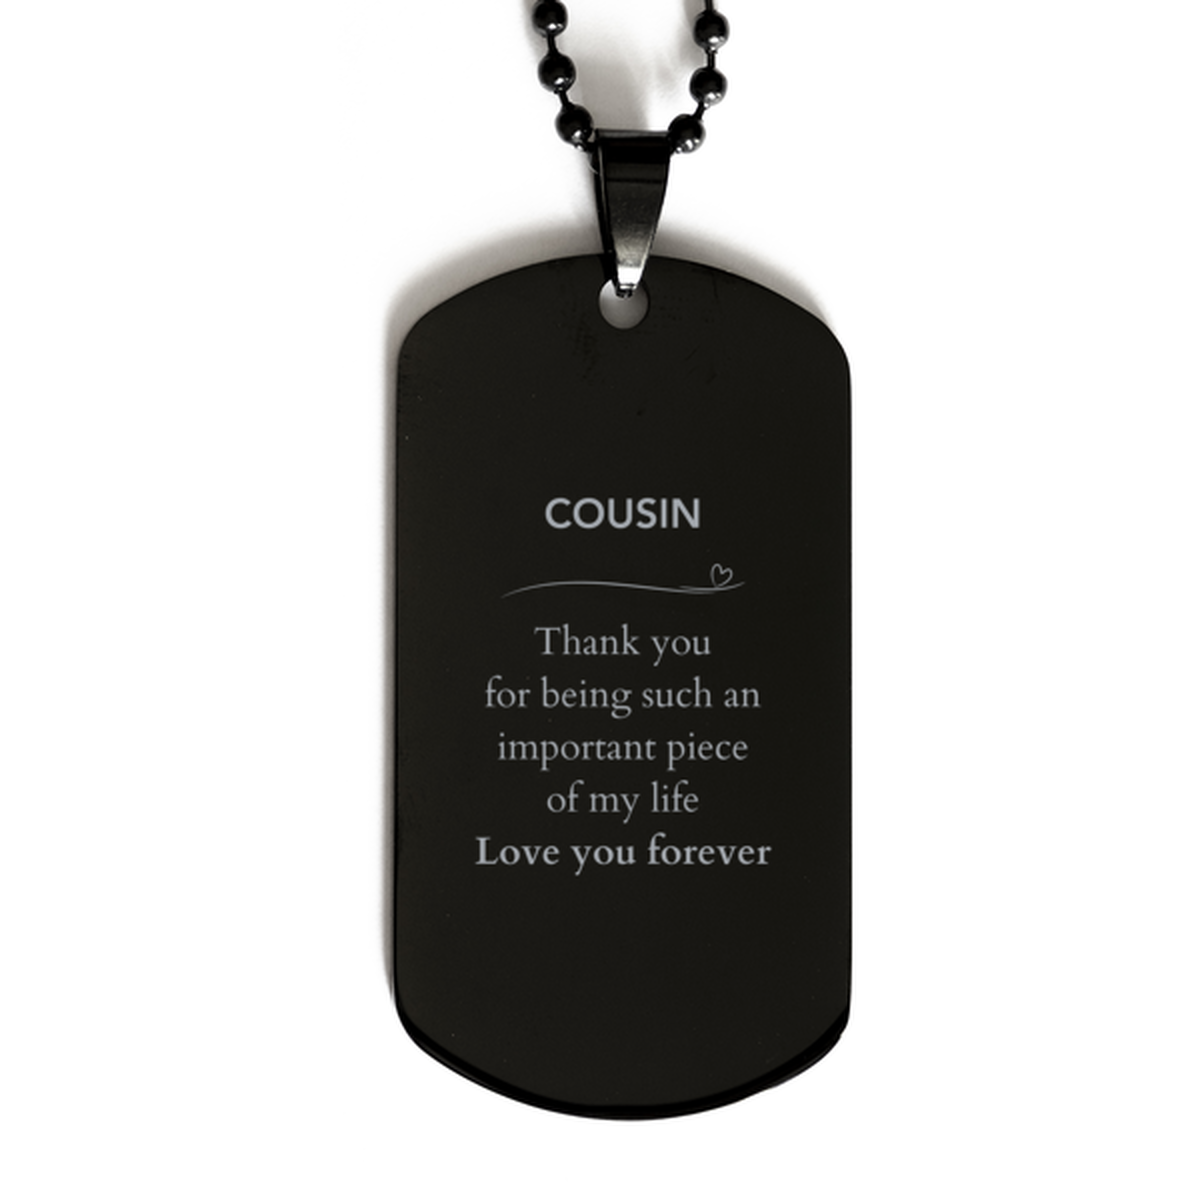 Appropriate Cousin Black Dog Tag Epic Birthday Gifts for Cousin Thank you for being such an important piece of my life Cousin Christmas Mothers Fathers Day